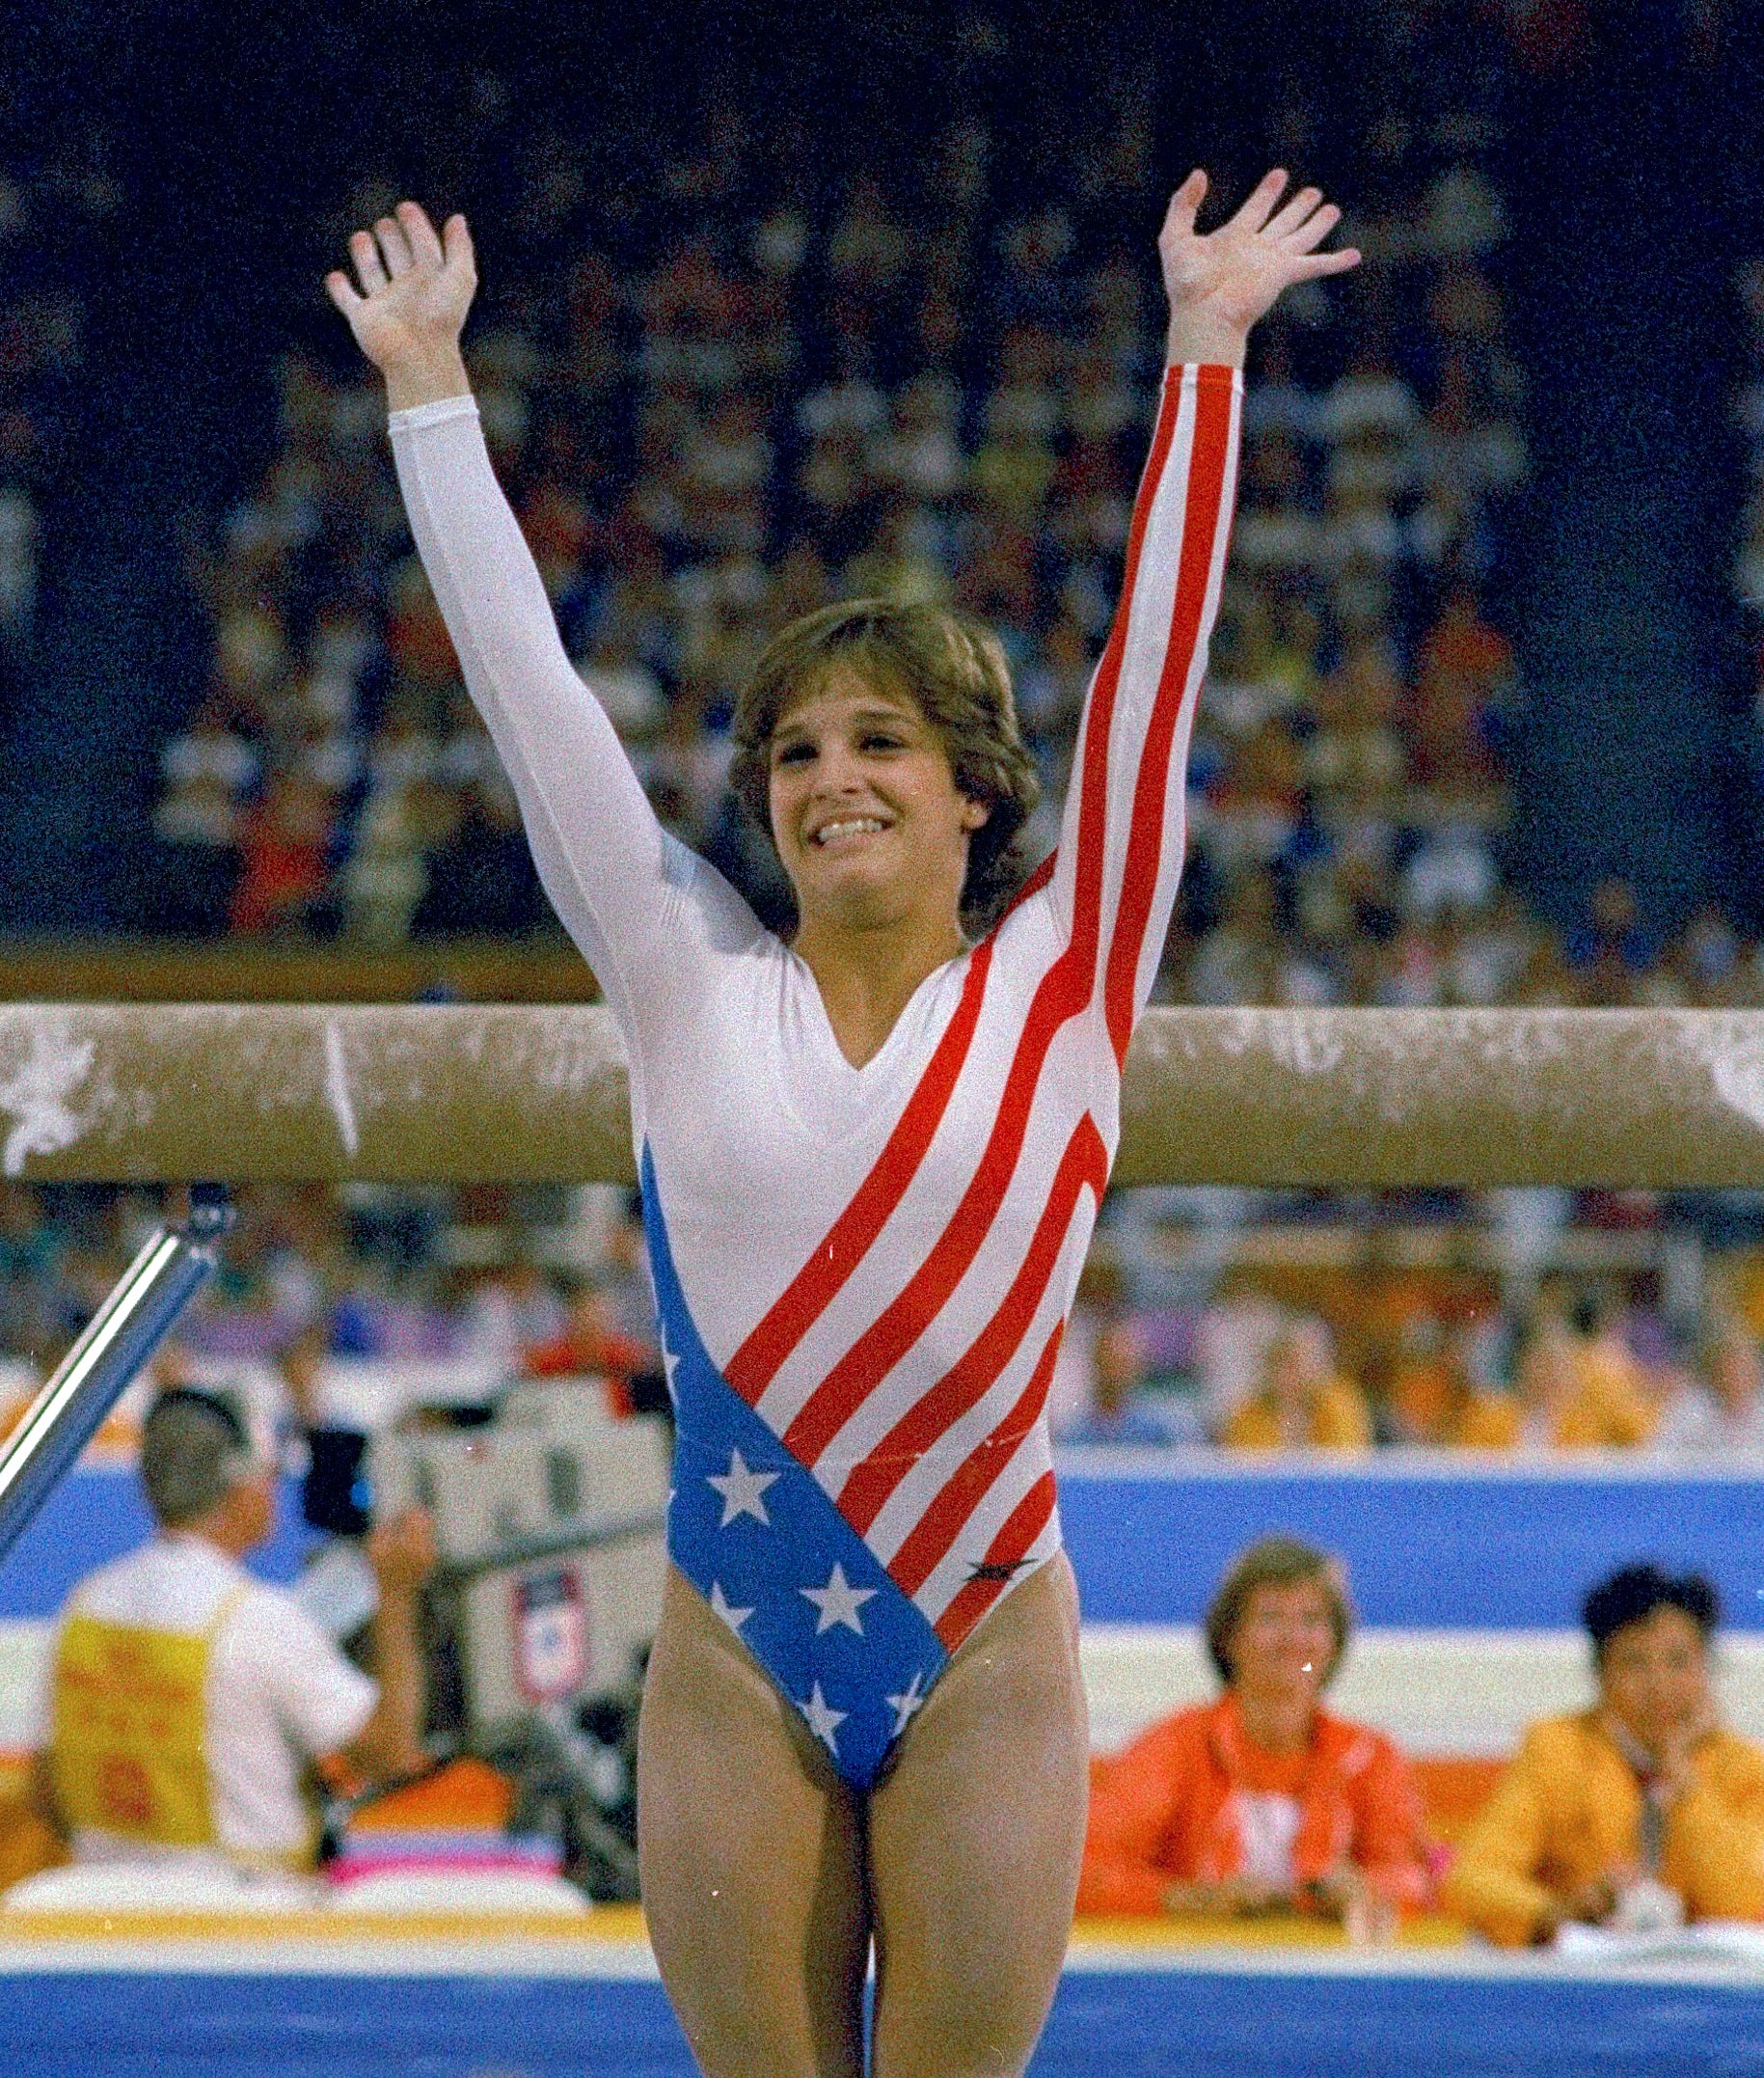 Mary Lou Retton reacts to applause after her performance at the Summer Olympics in Los Angeles on Aug. 3, 1984